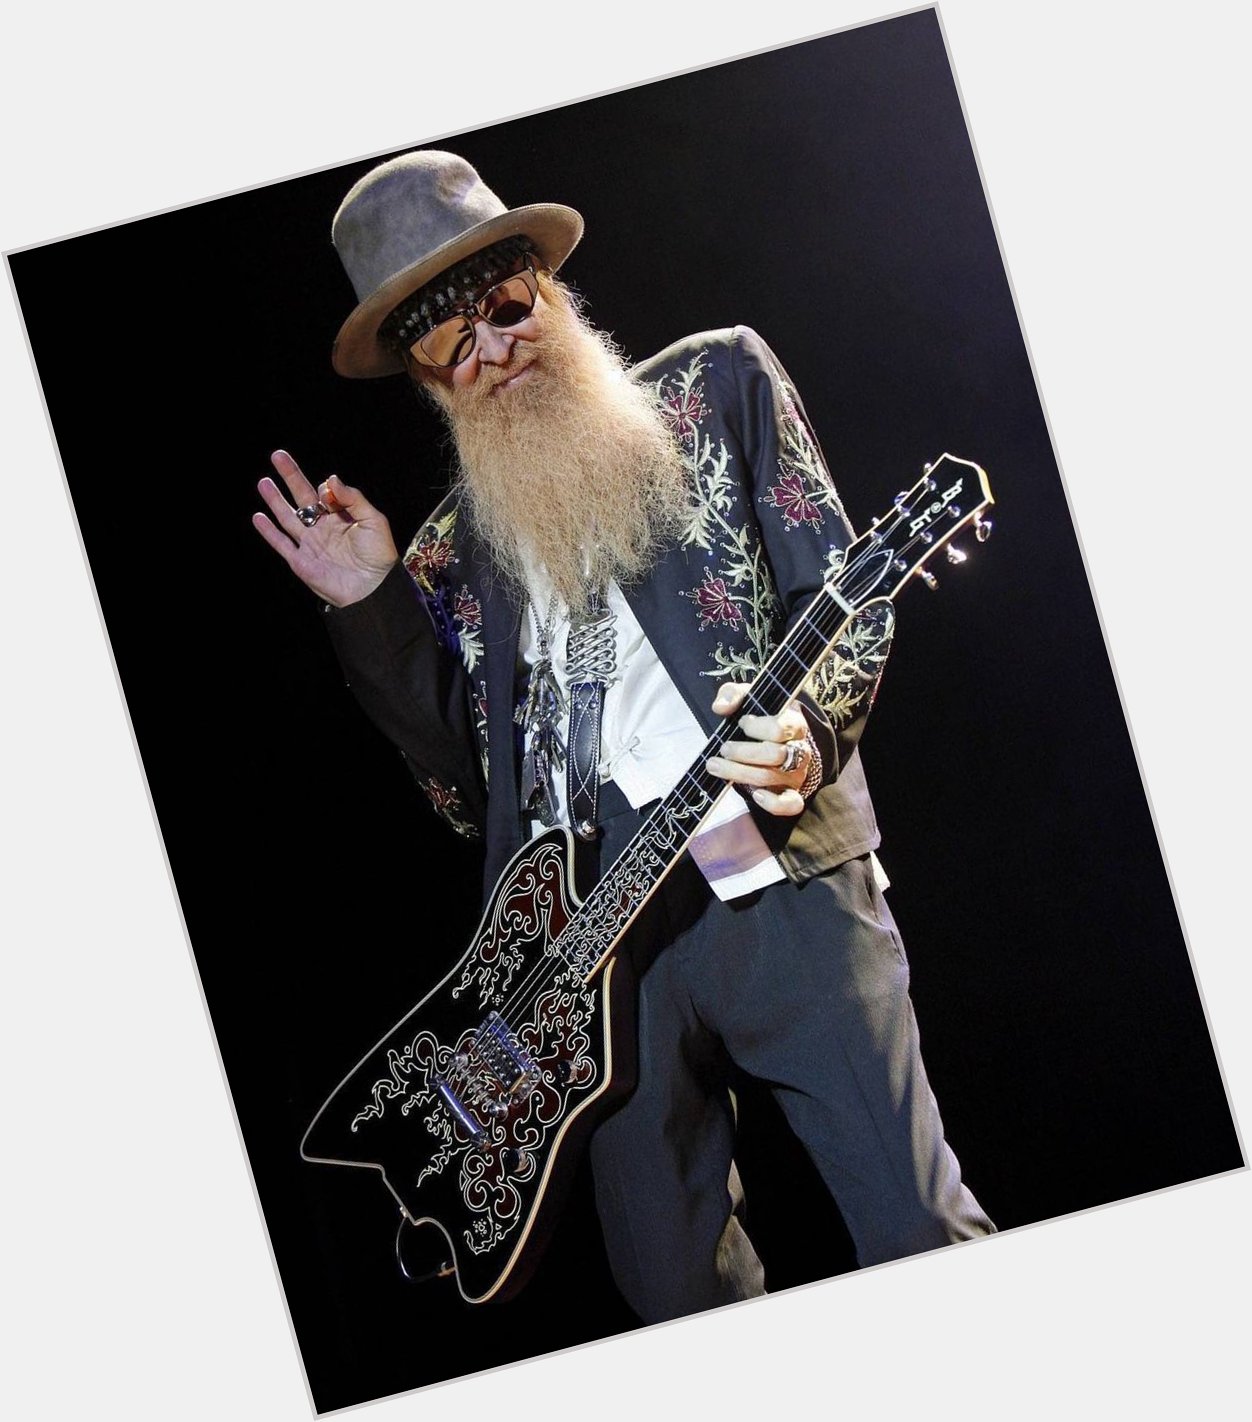 Happy belated birthday to the one and only Billy Gibbons!  